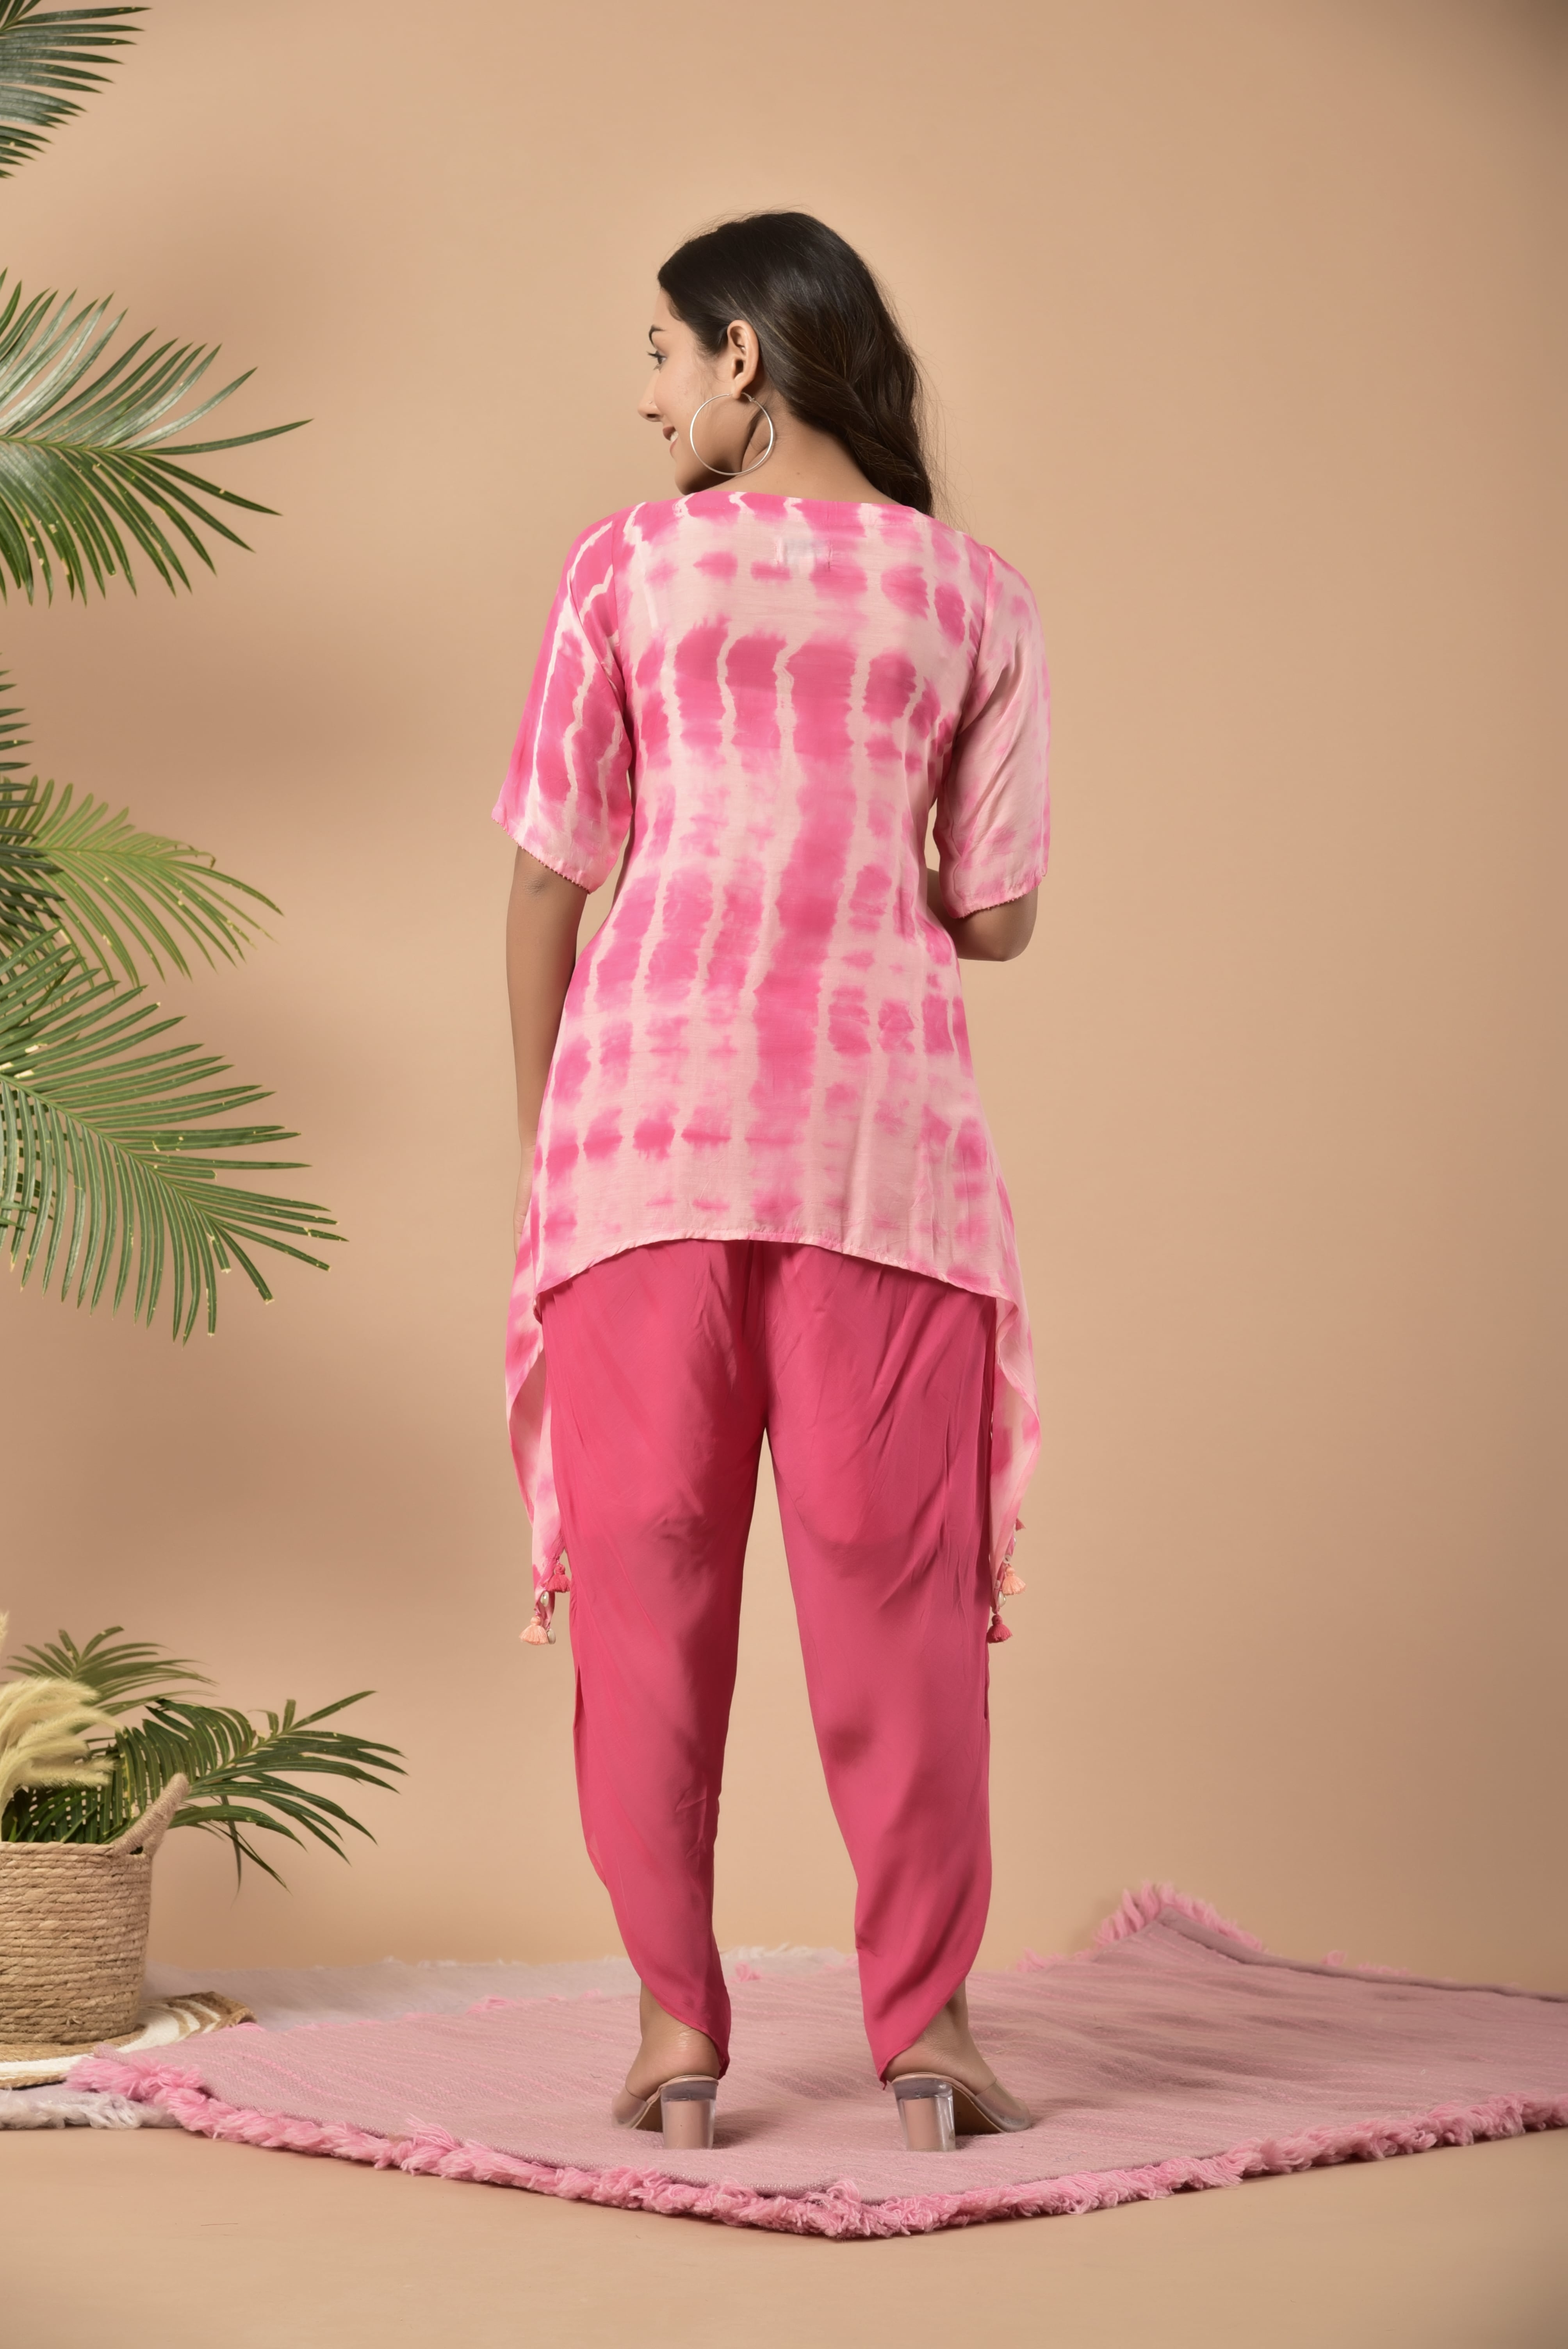 Pink shibori a - symmetrical top paired with dhotti pants